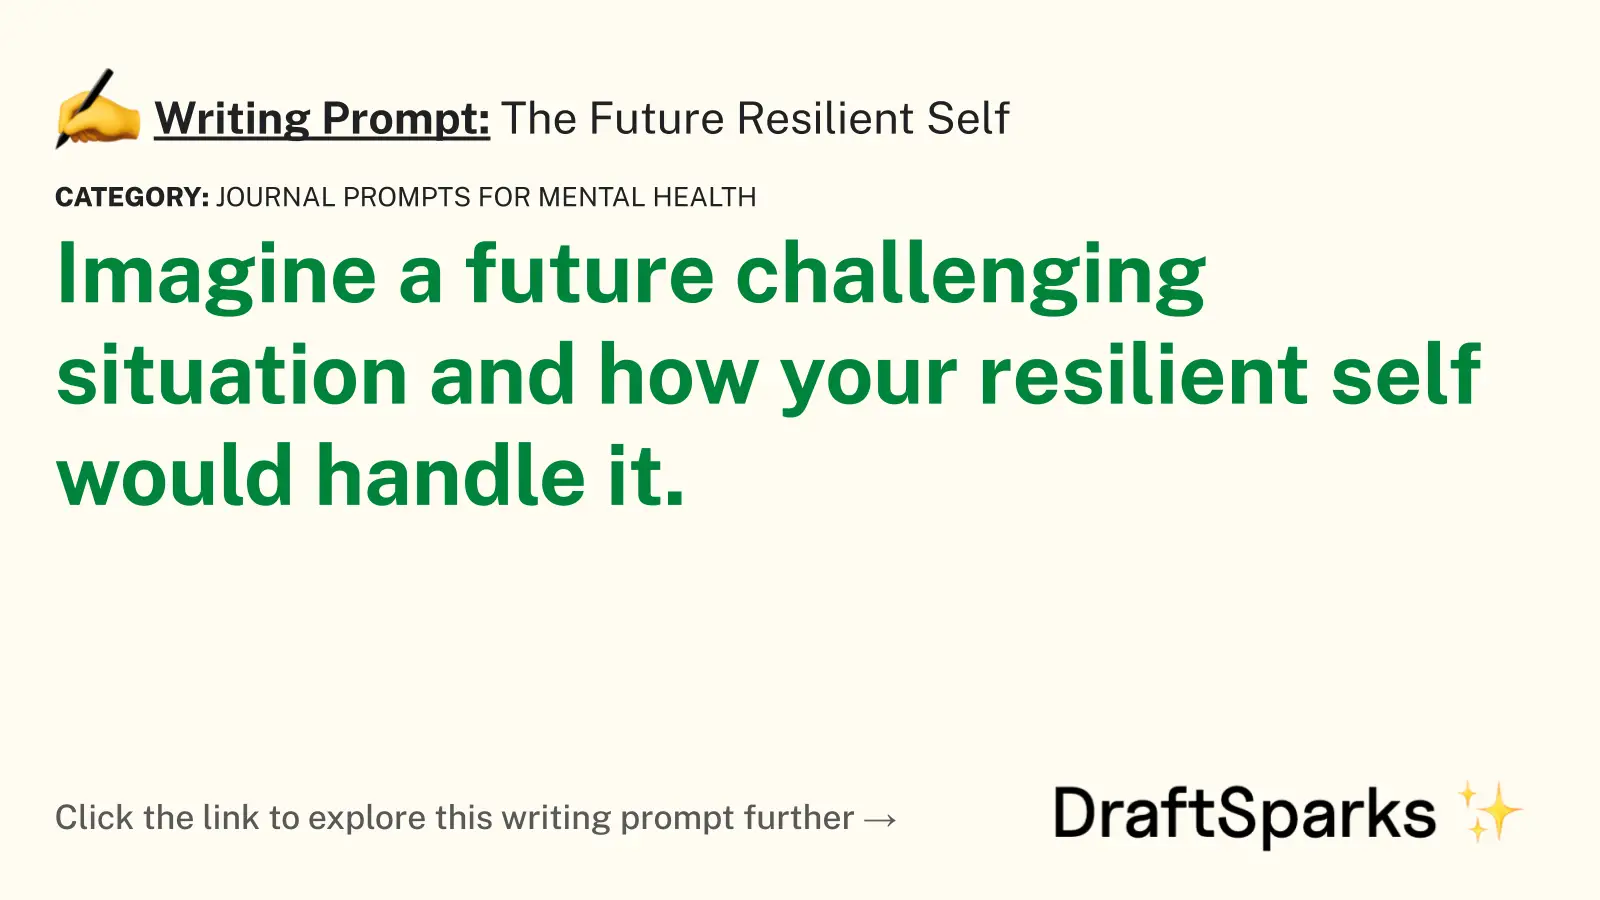 The Future Resilient Self